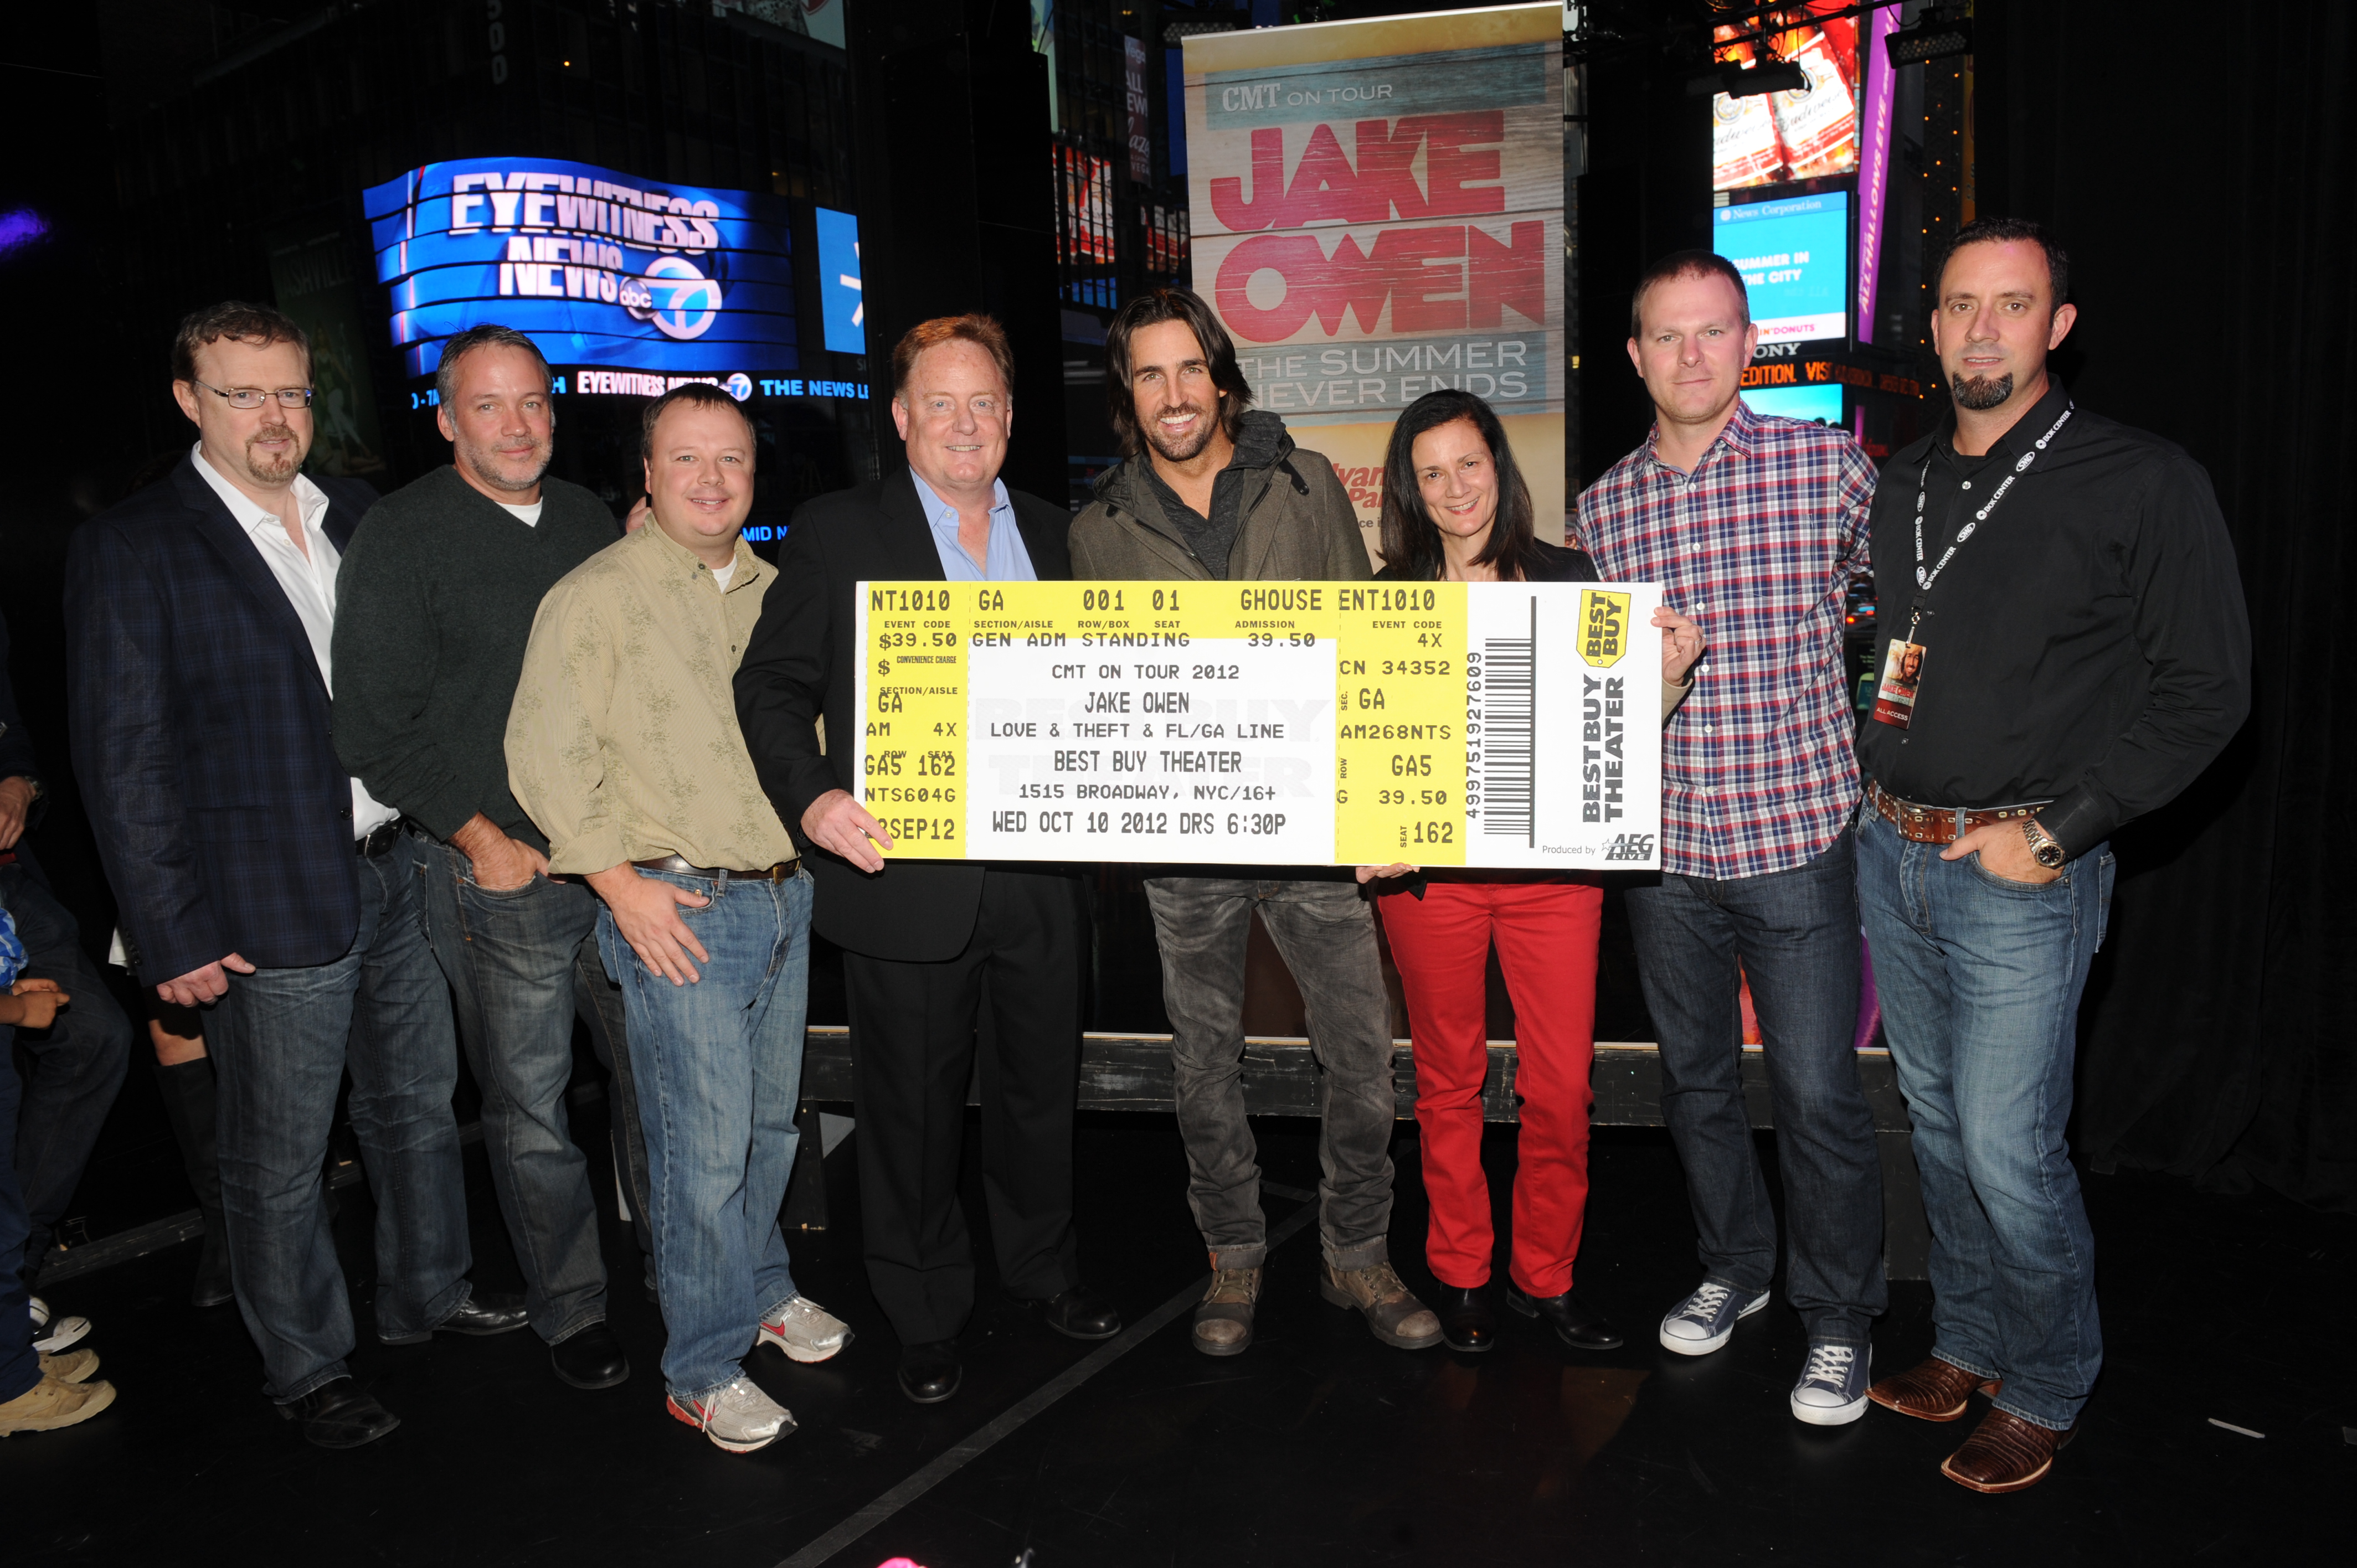 Jake Owen sells out opening night in NYC